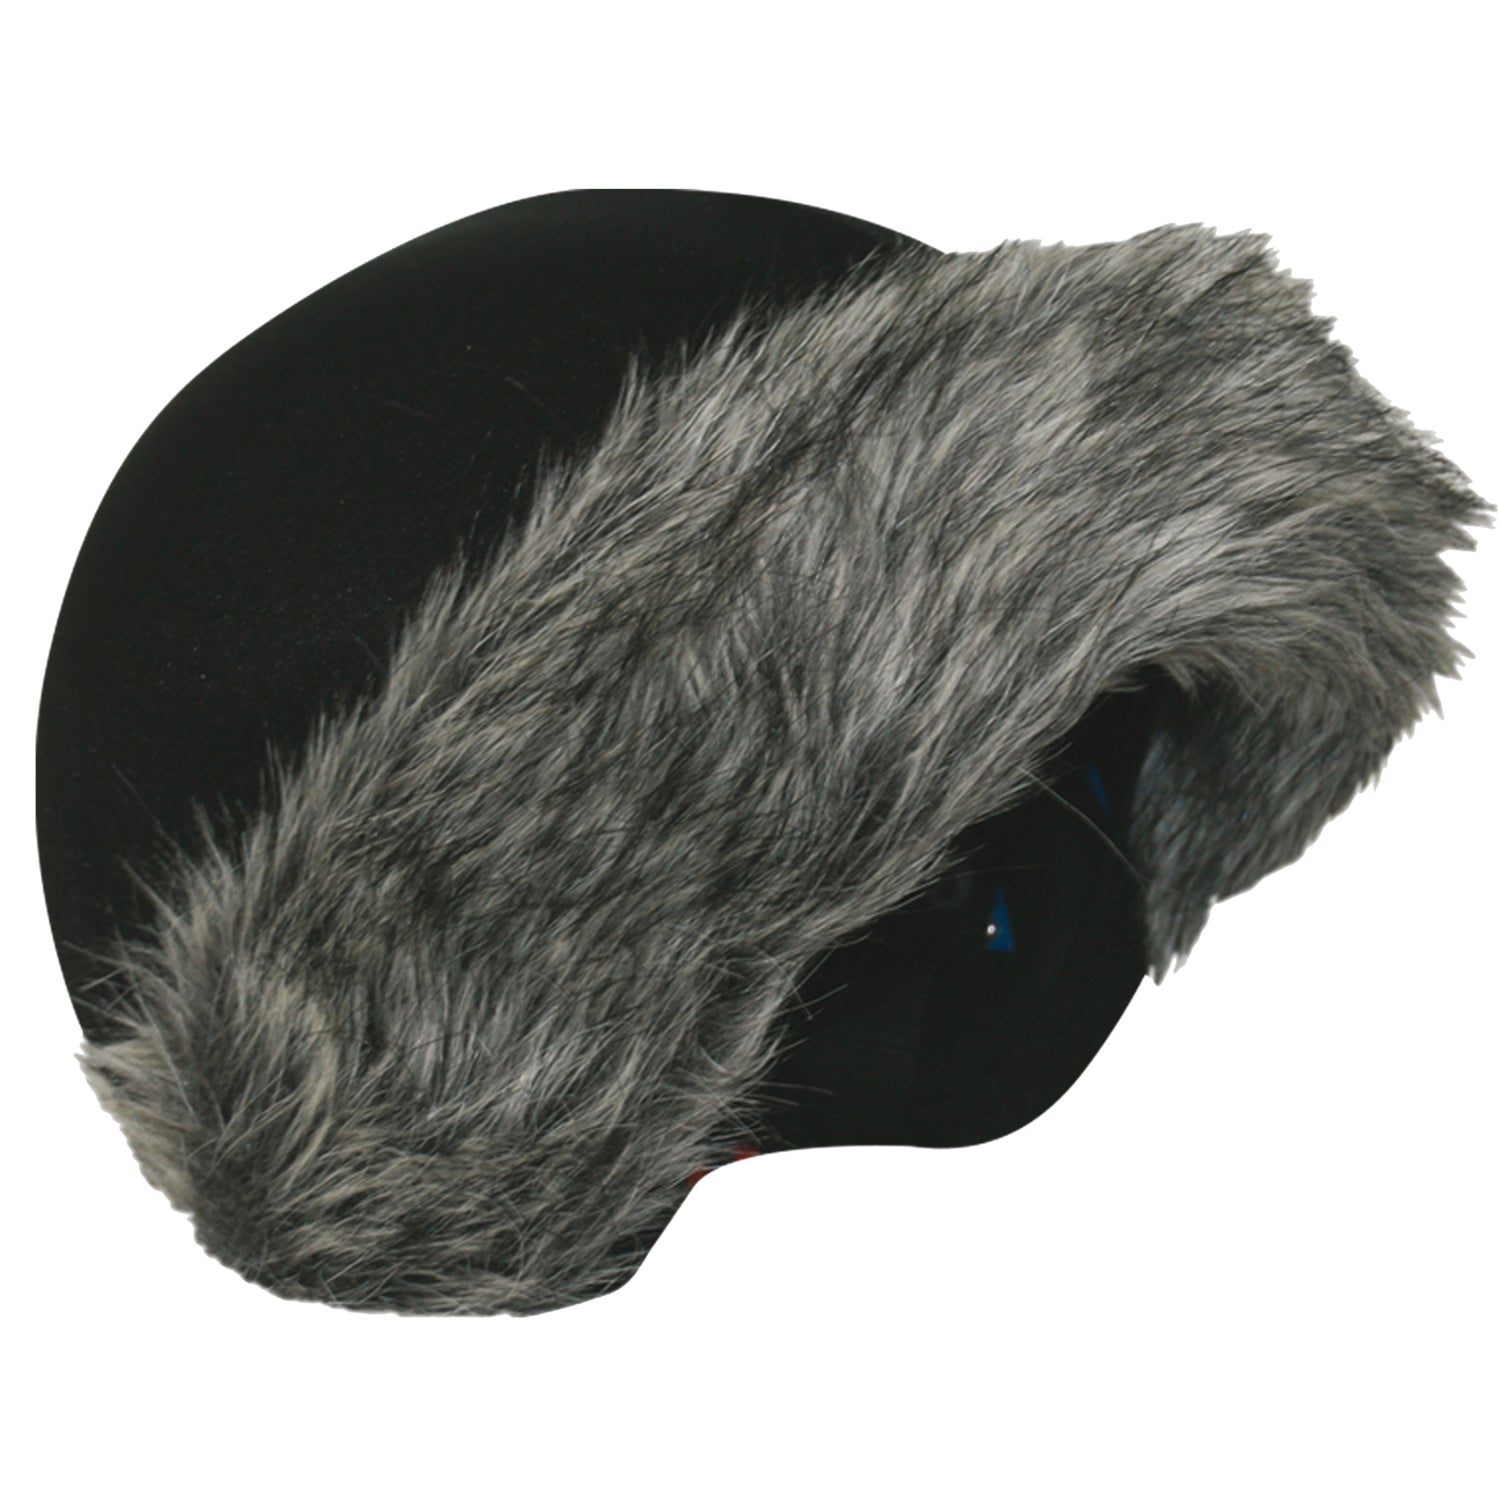 Coolcasc Black with Grey Fur Helmet Cover